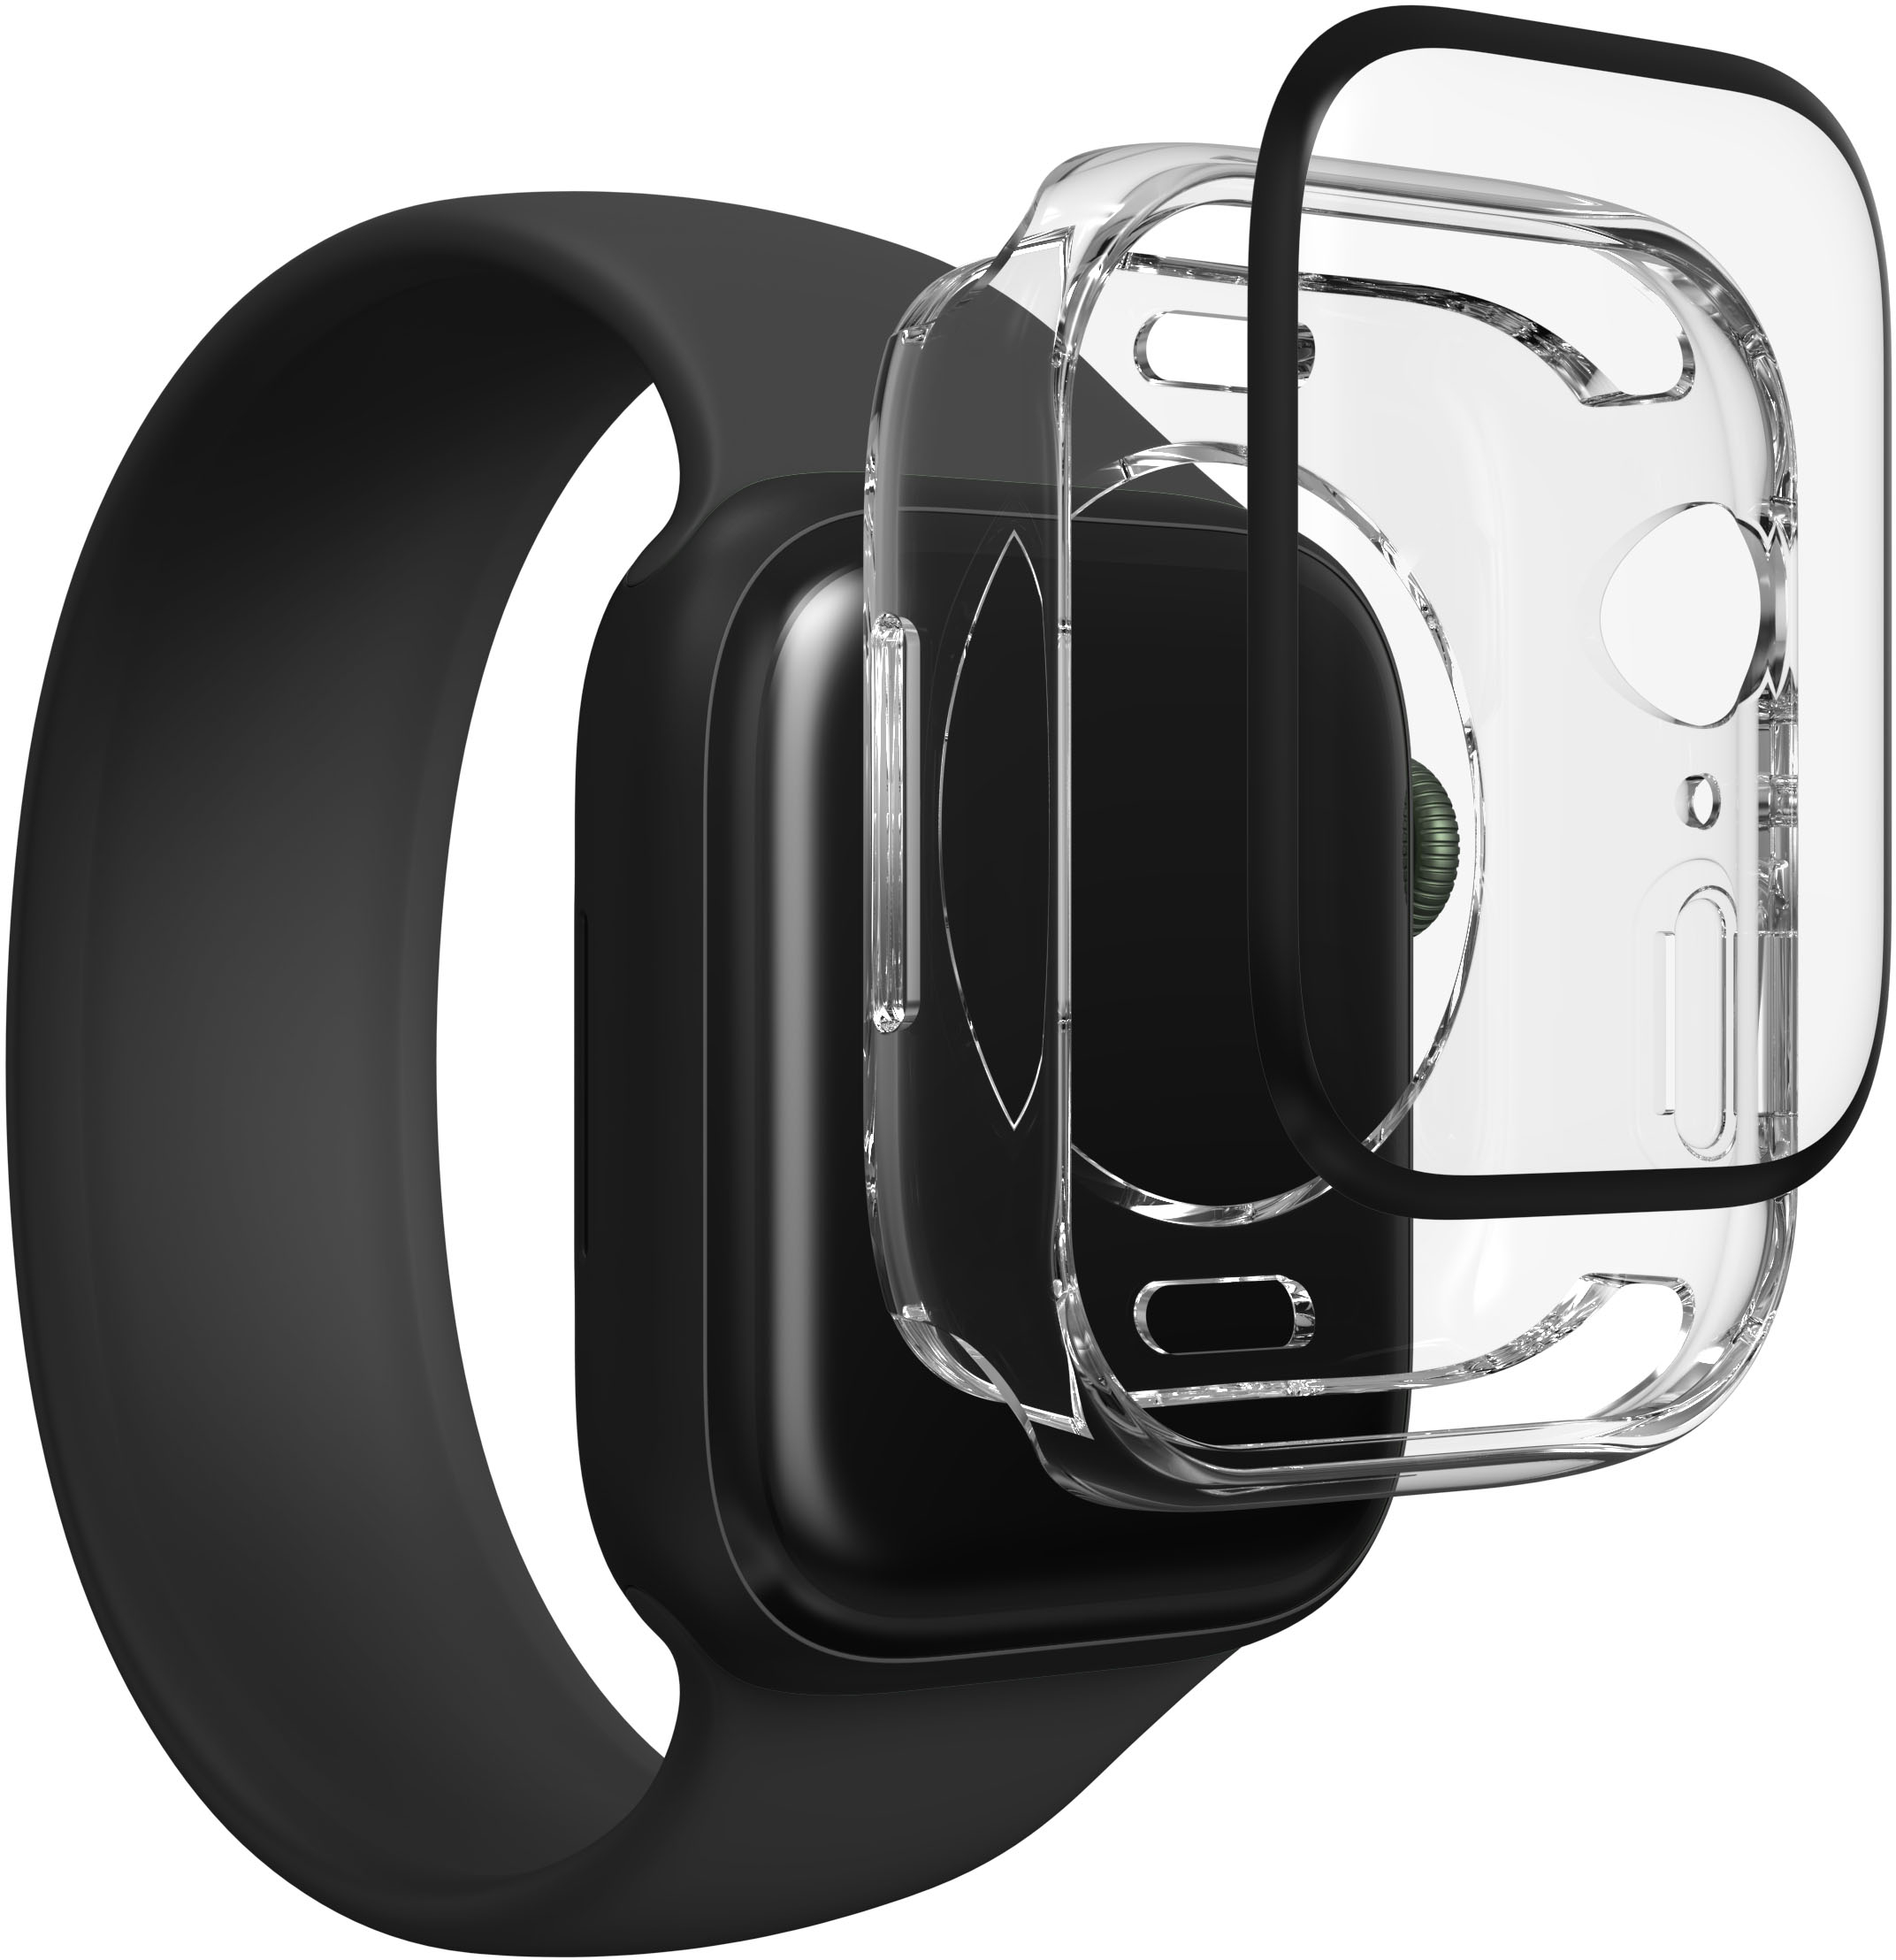 ZAGG - InvisibleShield GlassFusion+ 360 Flexible Hybrid Screen Protector + Bumper for Apple Watch Series 7 41mm - Clear